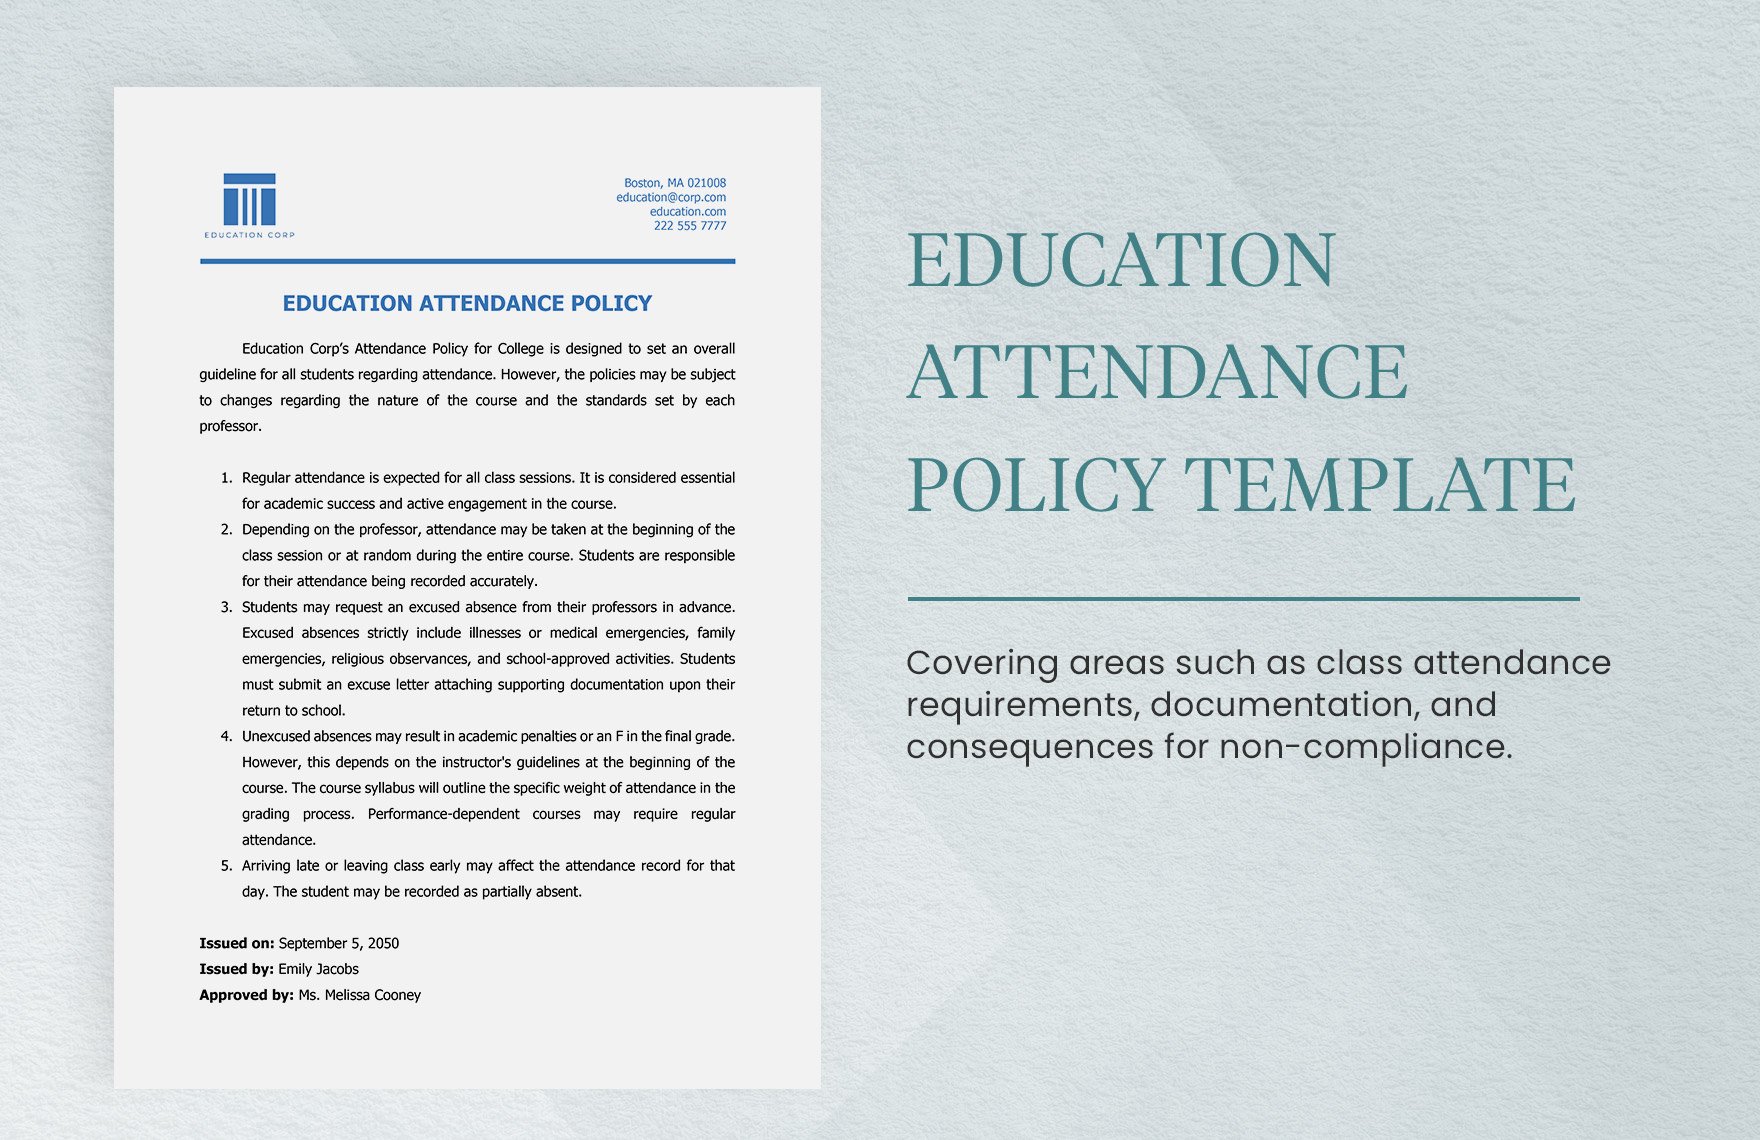 Education Attendance Policy Template  in Word, Google Docs